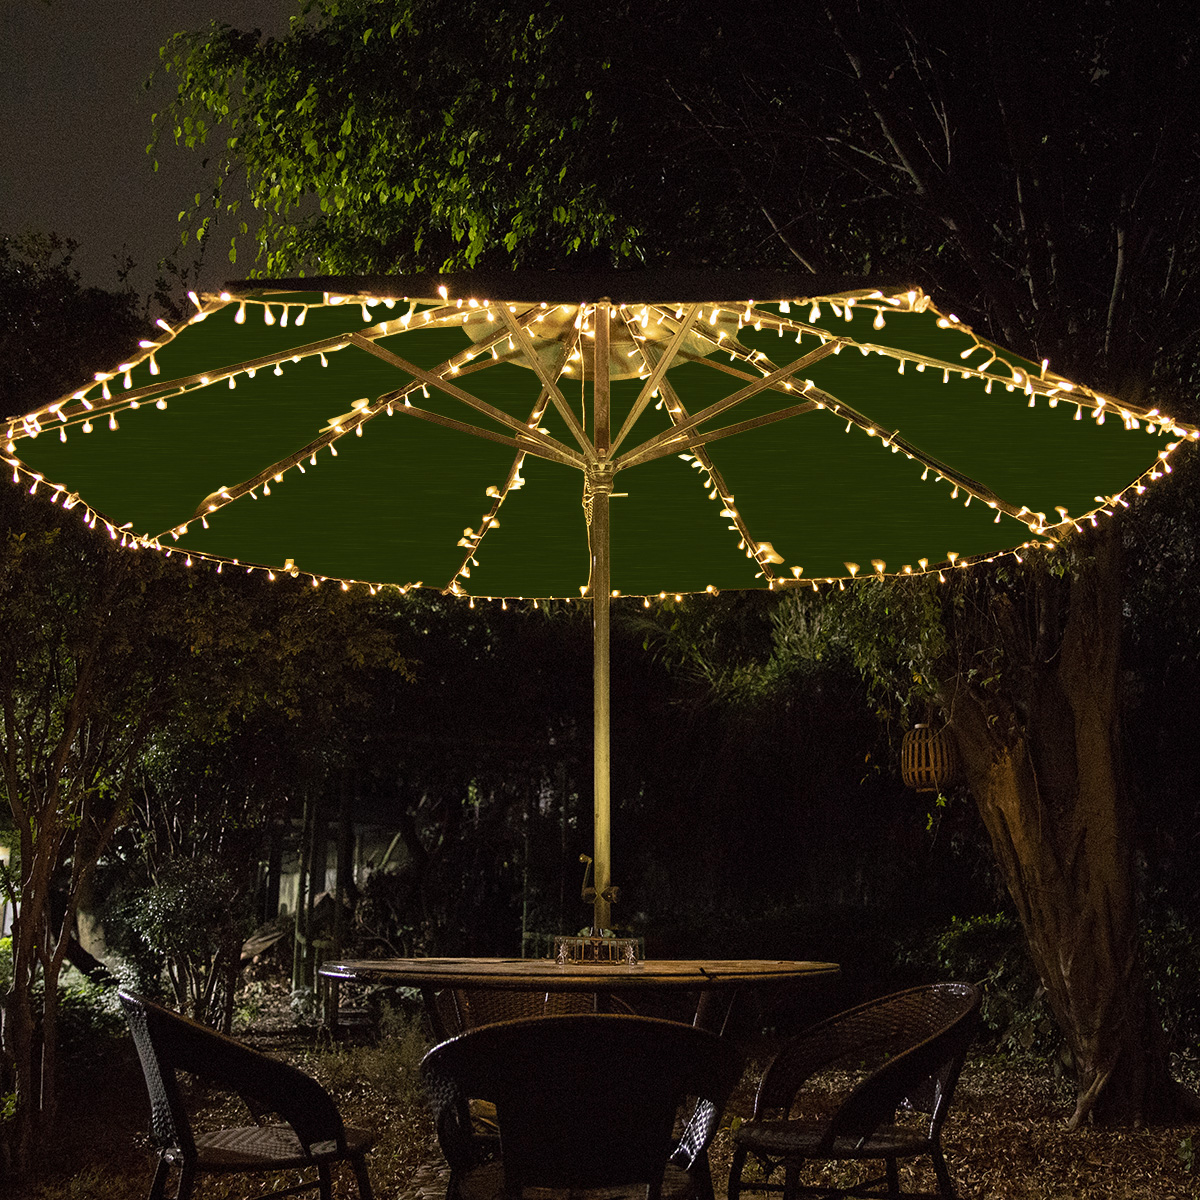 Solar Umbrella Lights Stopped Working – What To Do